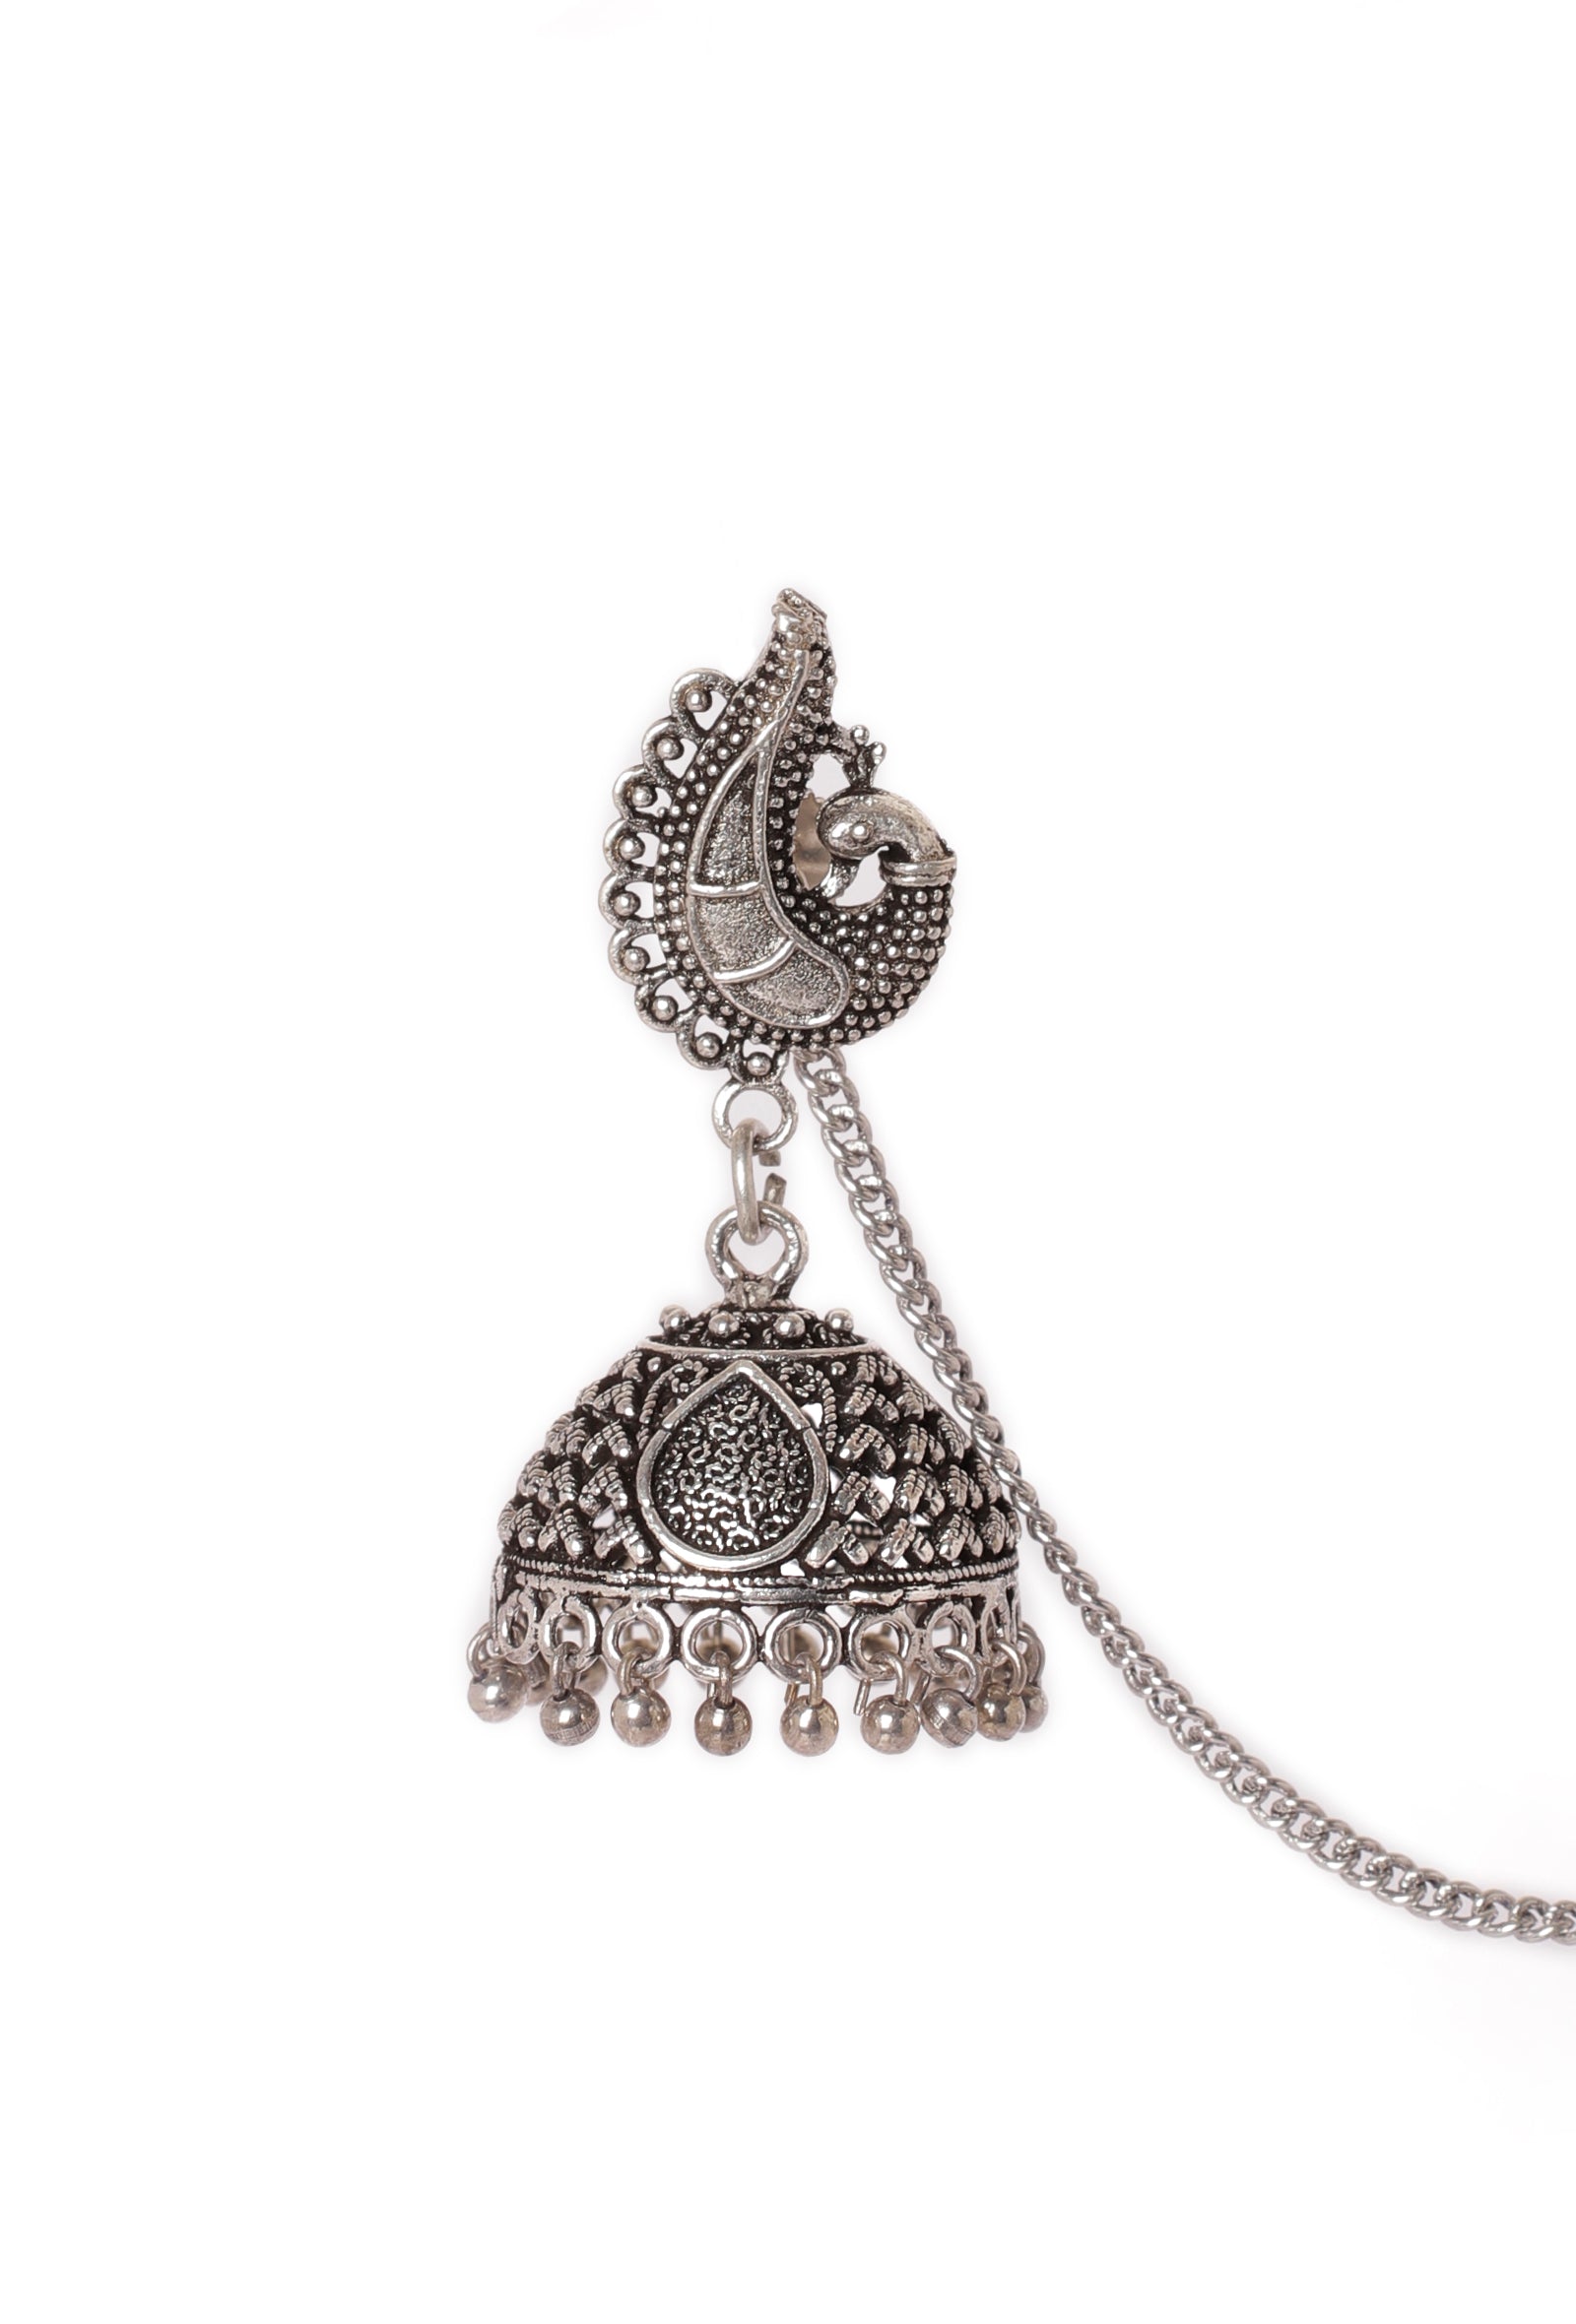 Silver Earring with Hair Chain traditional Rajasthani ghungroo jhumka with  — Discovered